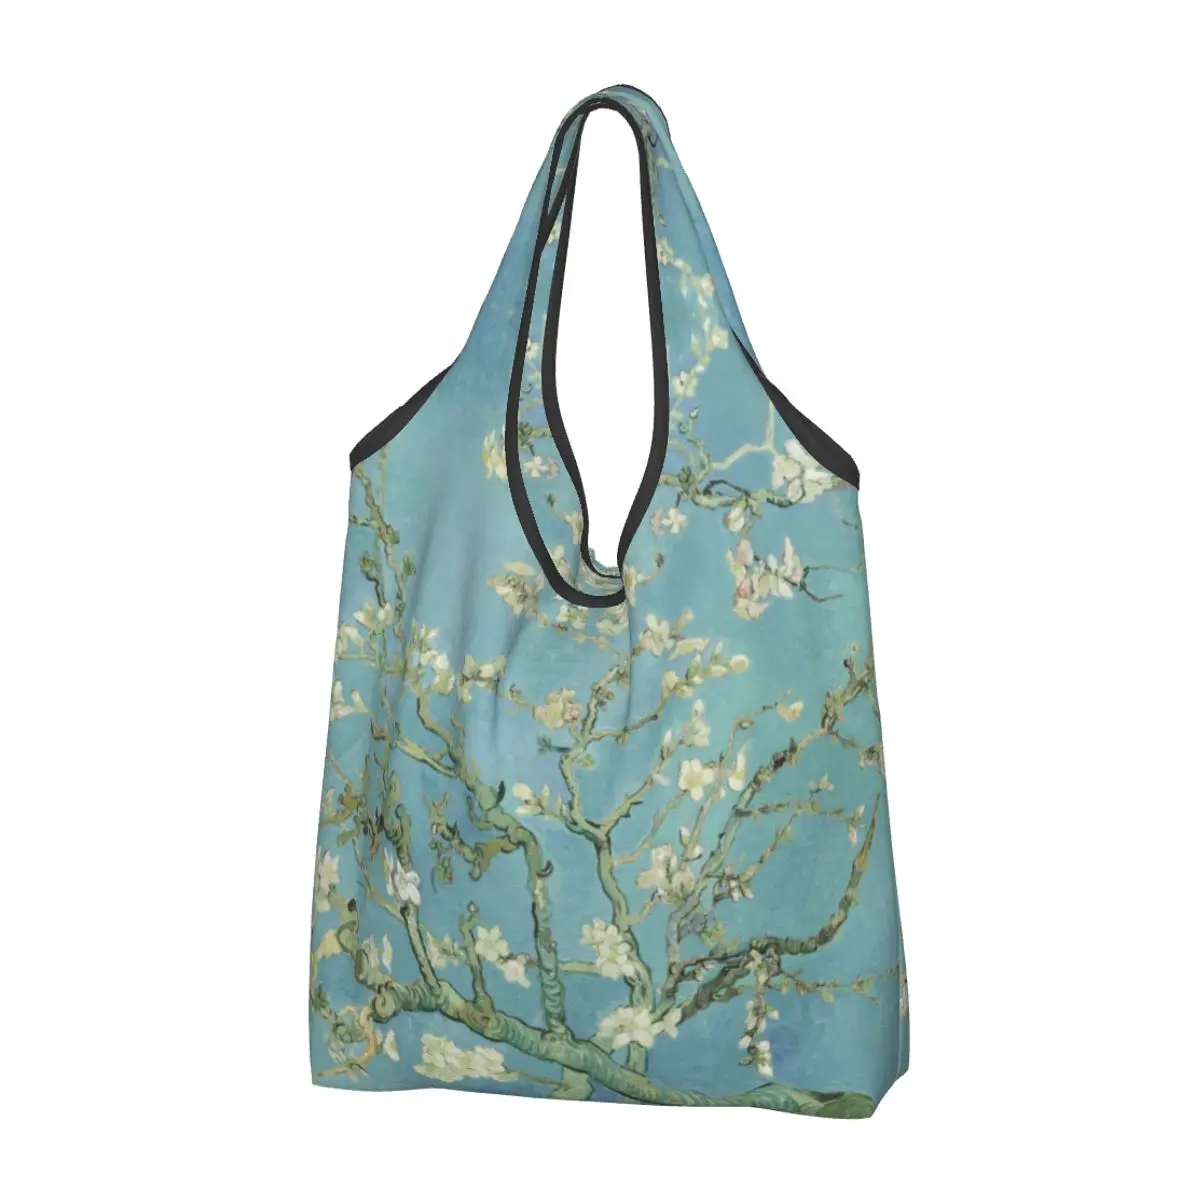 

Kawaii Almond Blossoms By Vincent Van Gogh Shopping Tote Bag Portable Flowers Painting Grocery Shoulder Shopper Bag